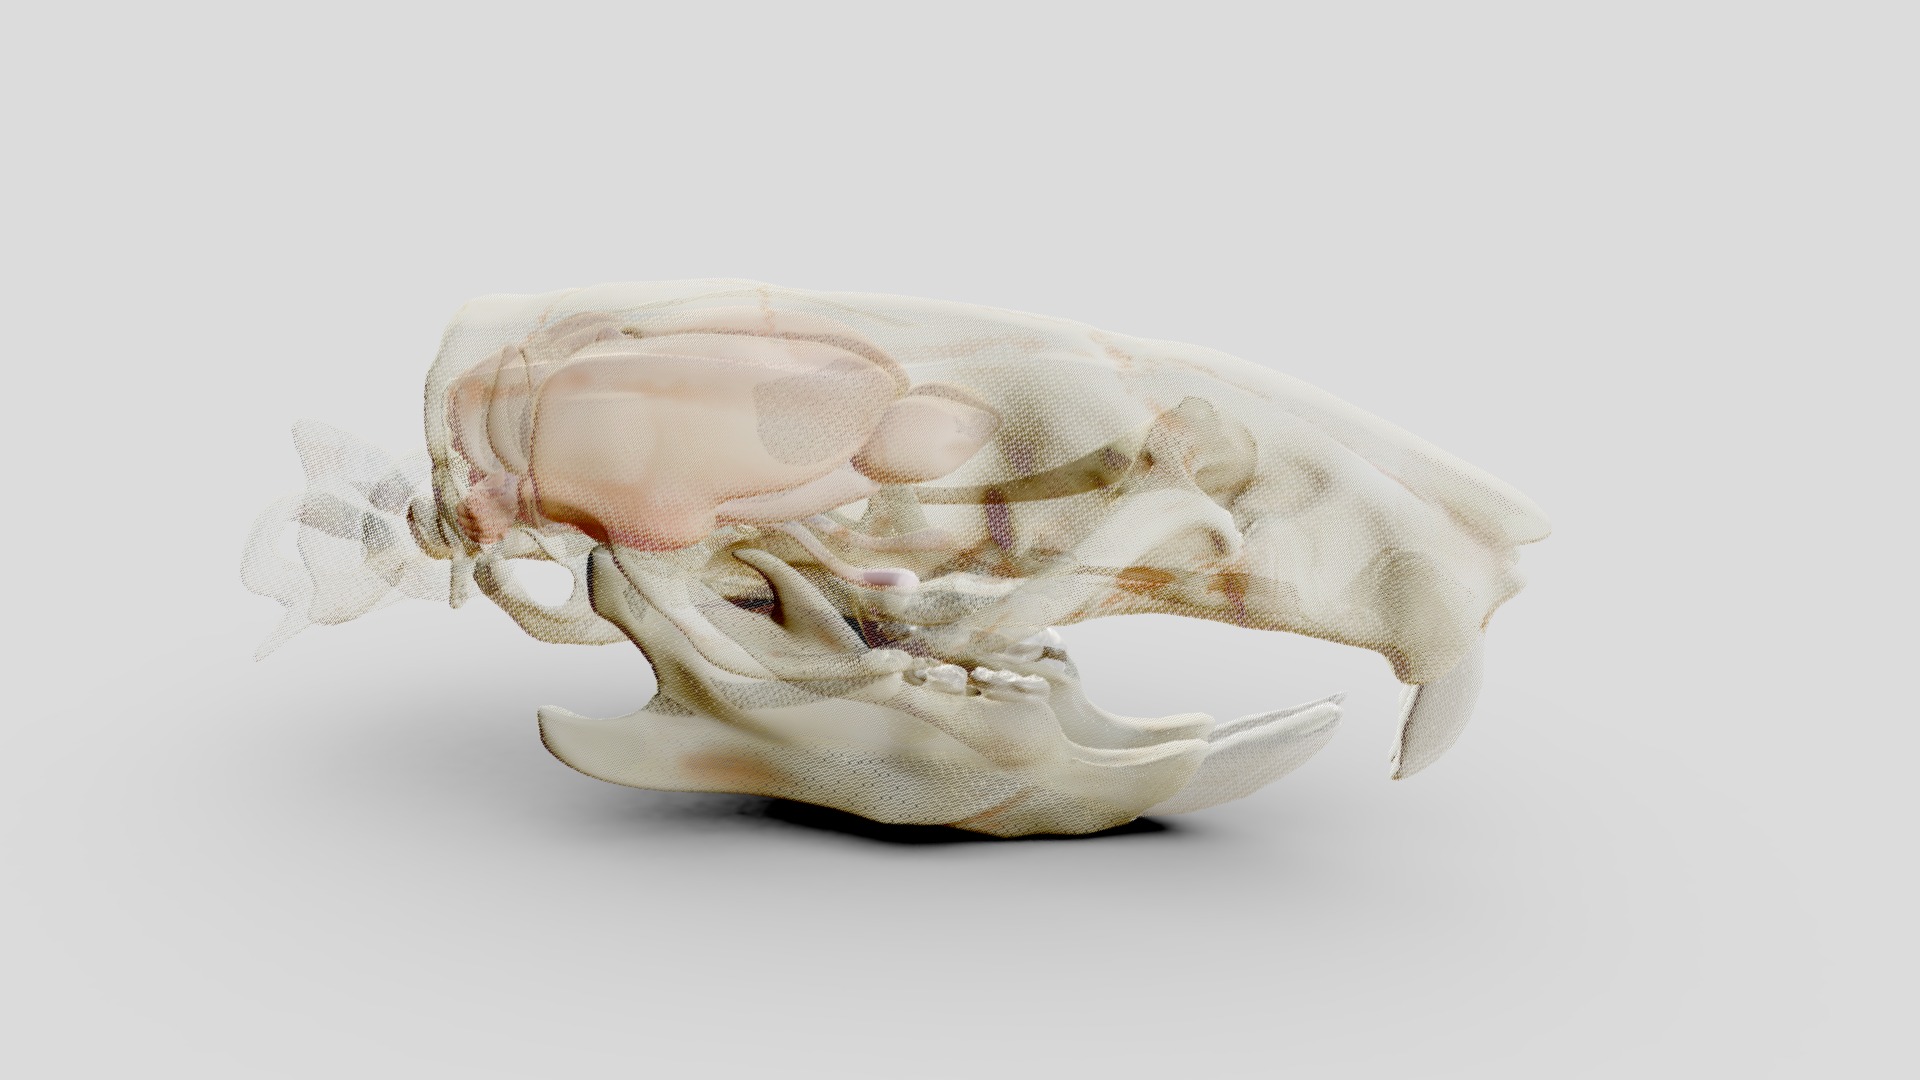 3D model skull and brains - This is a 3D model of the skull and brains. The 3D model is about a white shell with a brown shell.